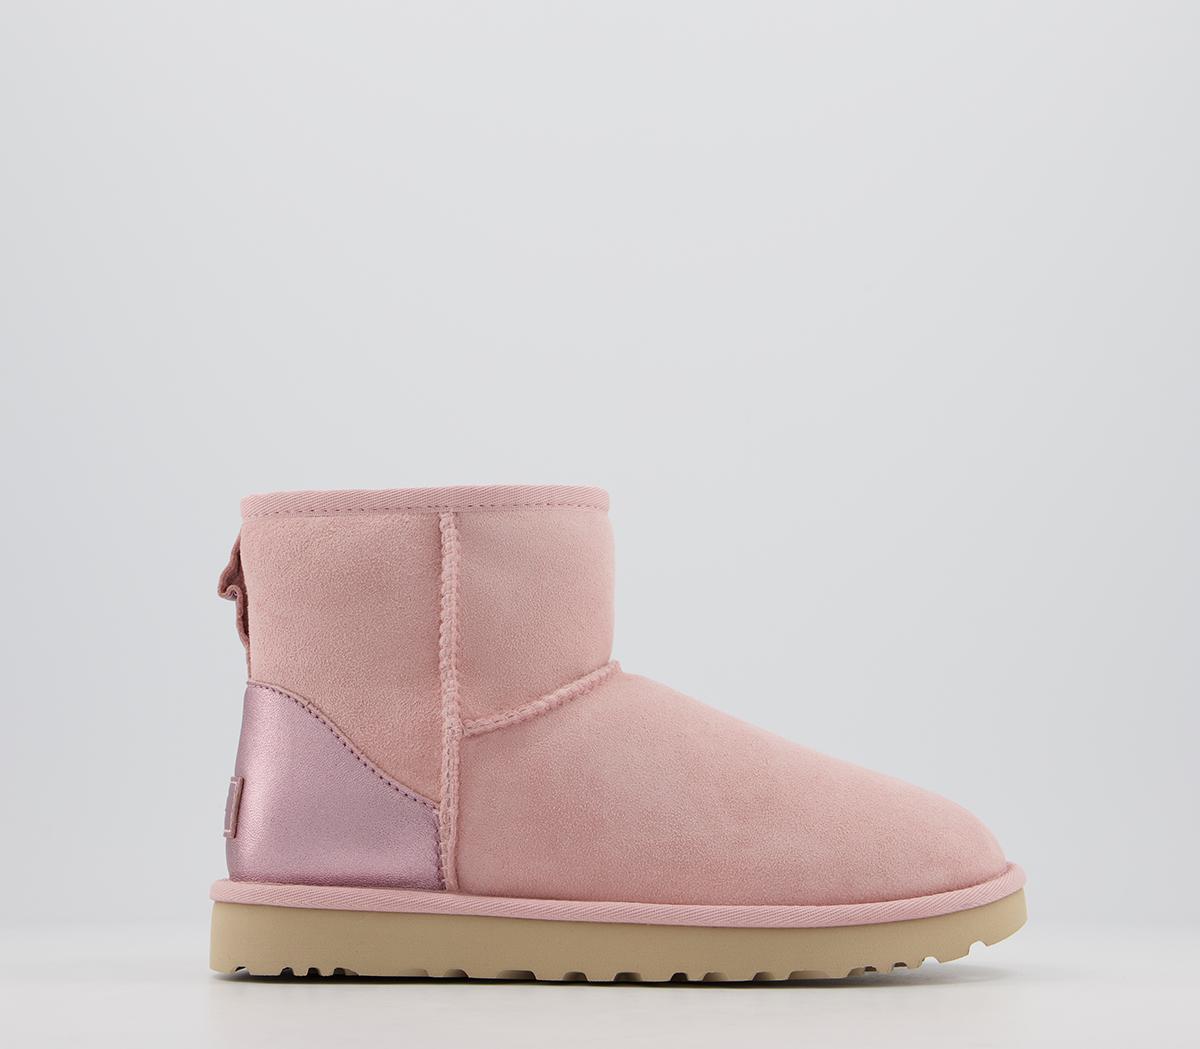 new pink ugg boots